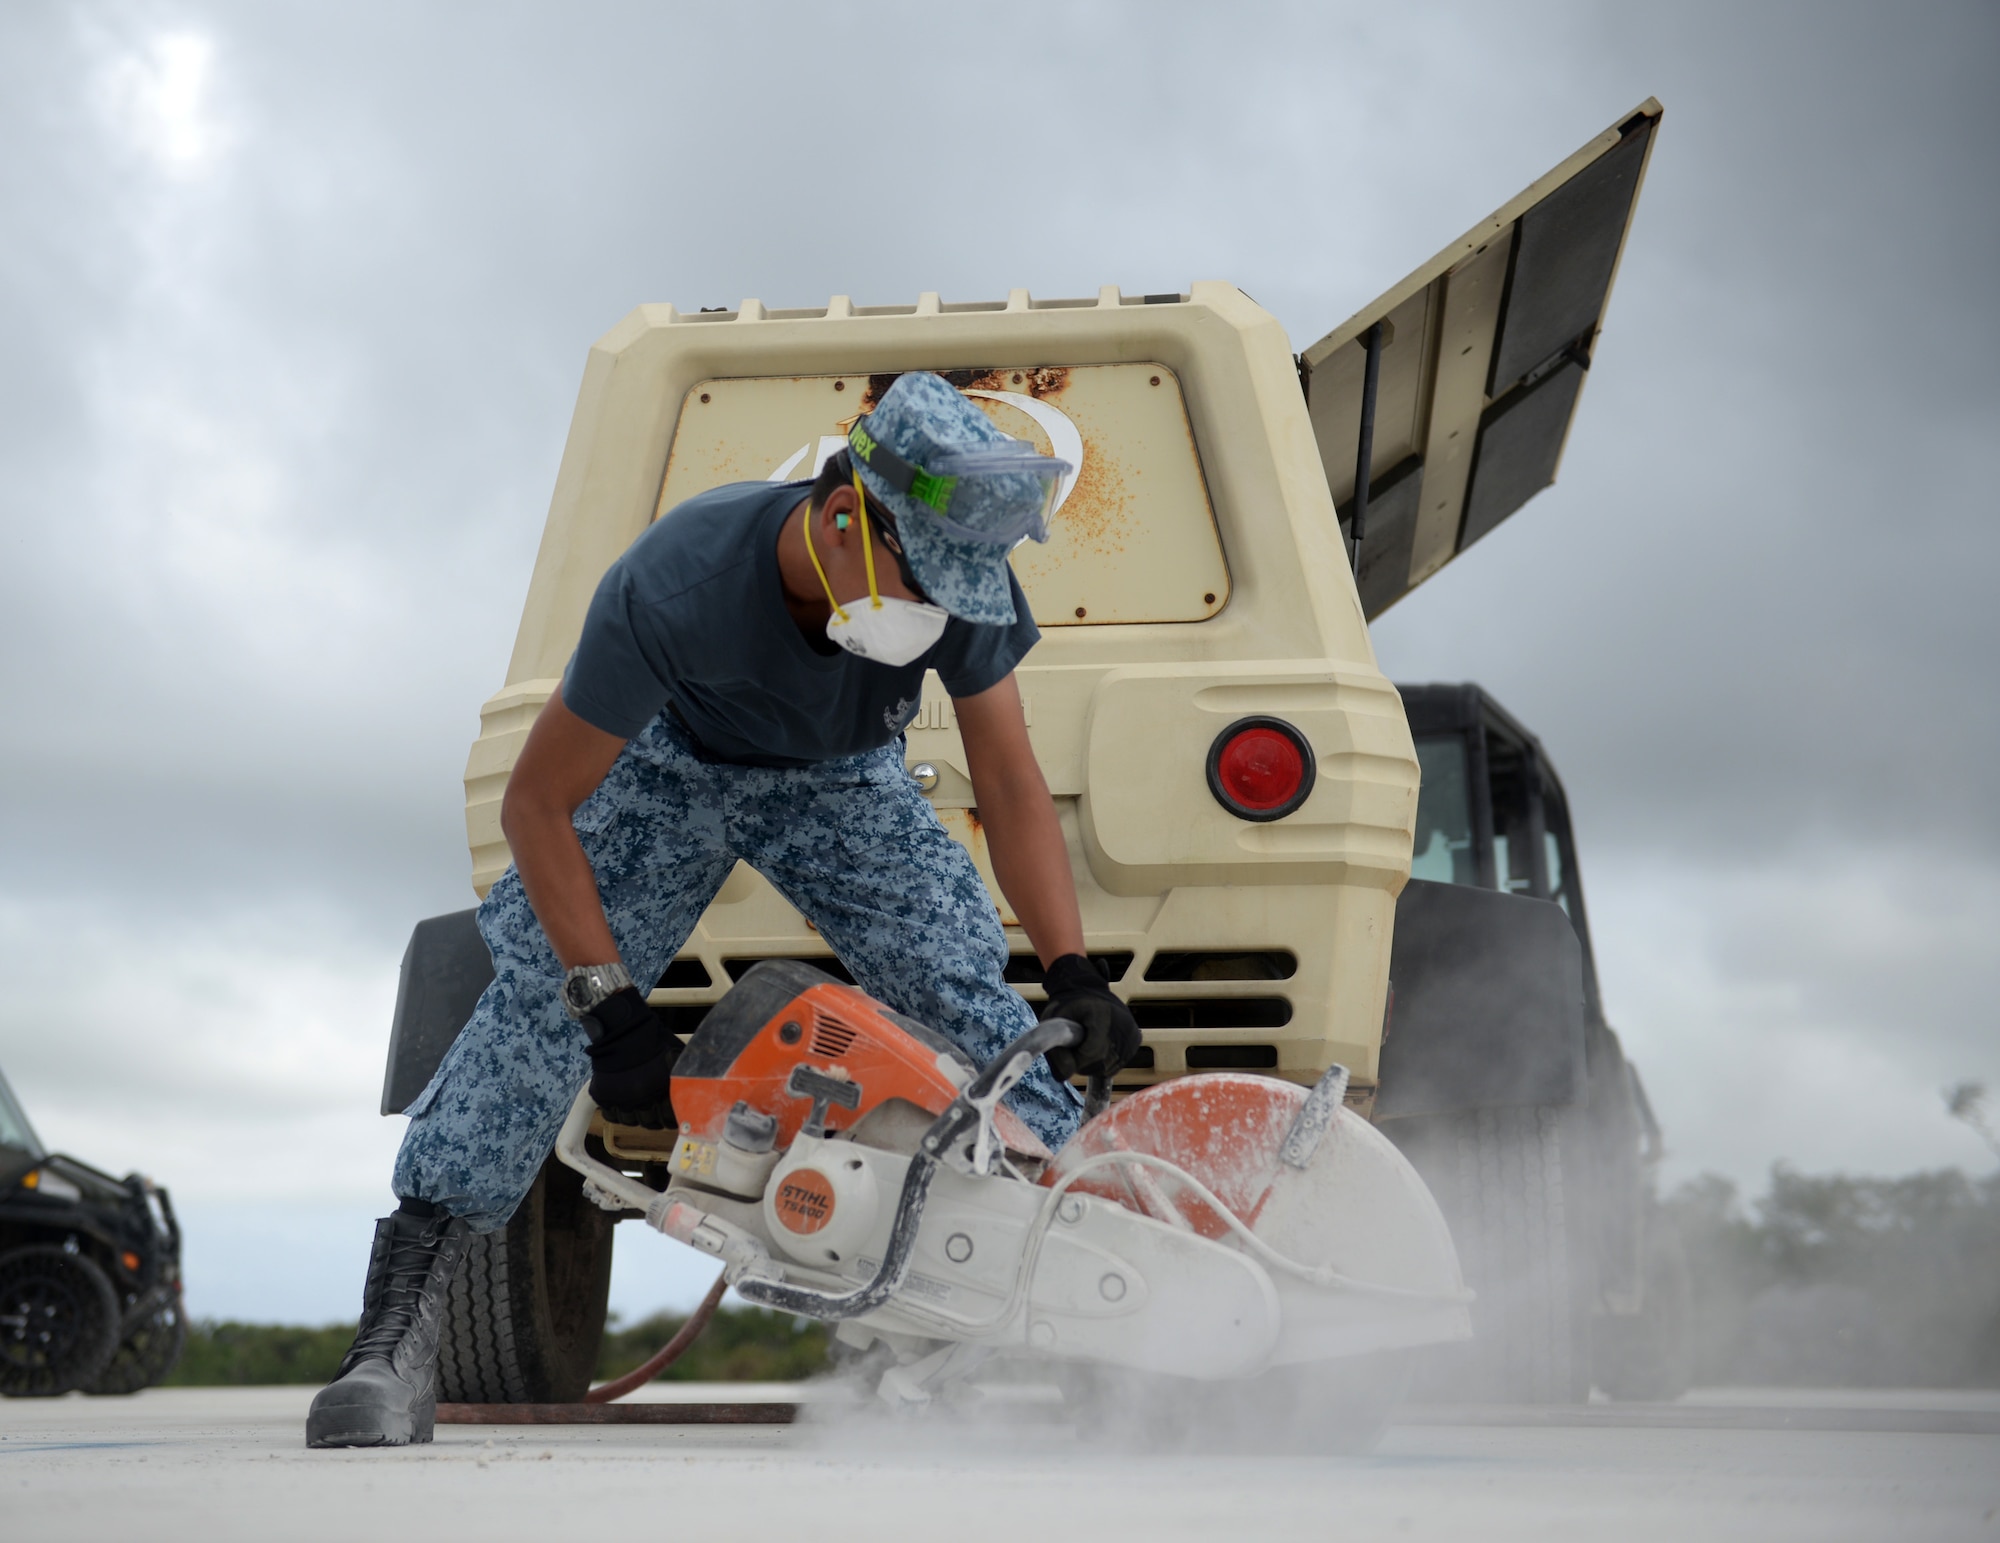 Republic of Singapore Air Force Military Expert 2 Wei Han Tan, crater repair instructor, uses a pavement saw while repairing chips in an airfield during Partner Nation Silver Flag, Feb. 14, 2016, at Andersen Air Force Base, Guam. The exercise is a small part of the first multilateral Silver Flag Exercise, a U.S. Pacific Command multilateral Theater Security Cooperation Program subject matter expert exchange event designed to build partnerships and promote interoperability through the equitable exchange of civil engineer related information. (U.S. Air Force photo by Senior Airman Joshua Smoot/Released)